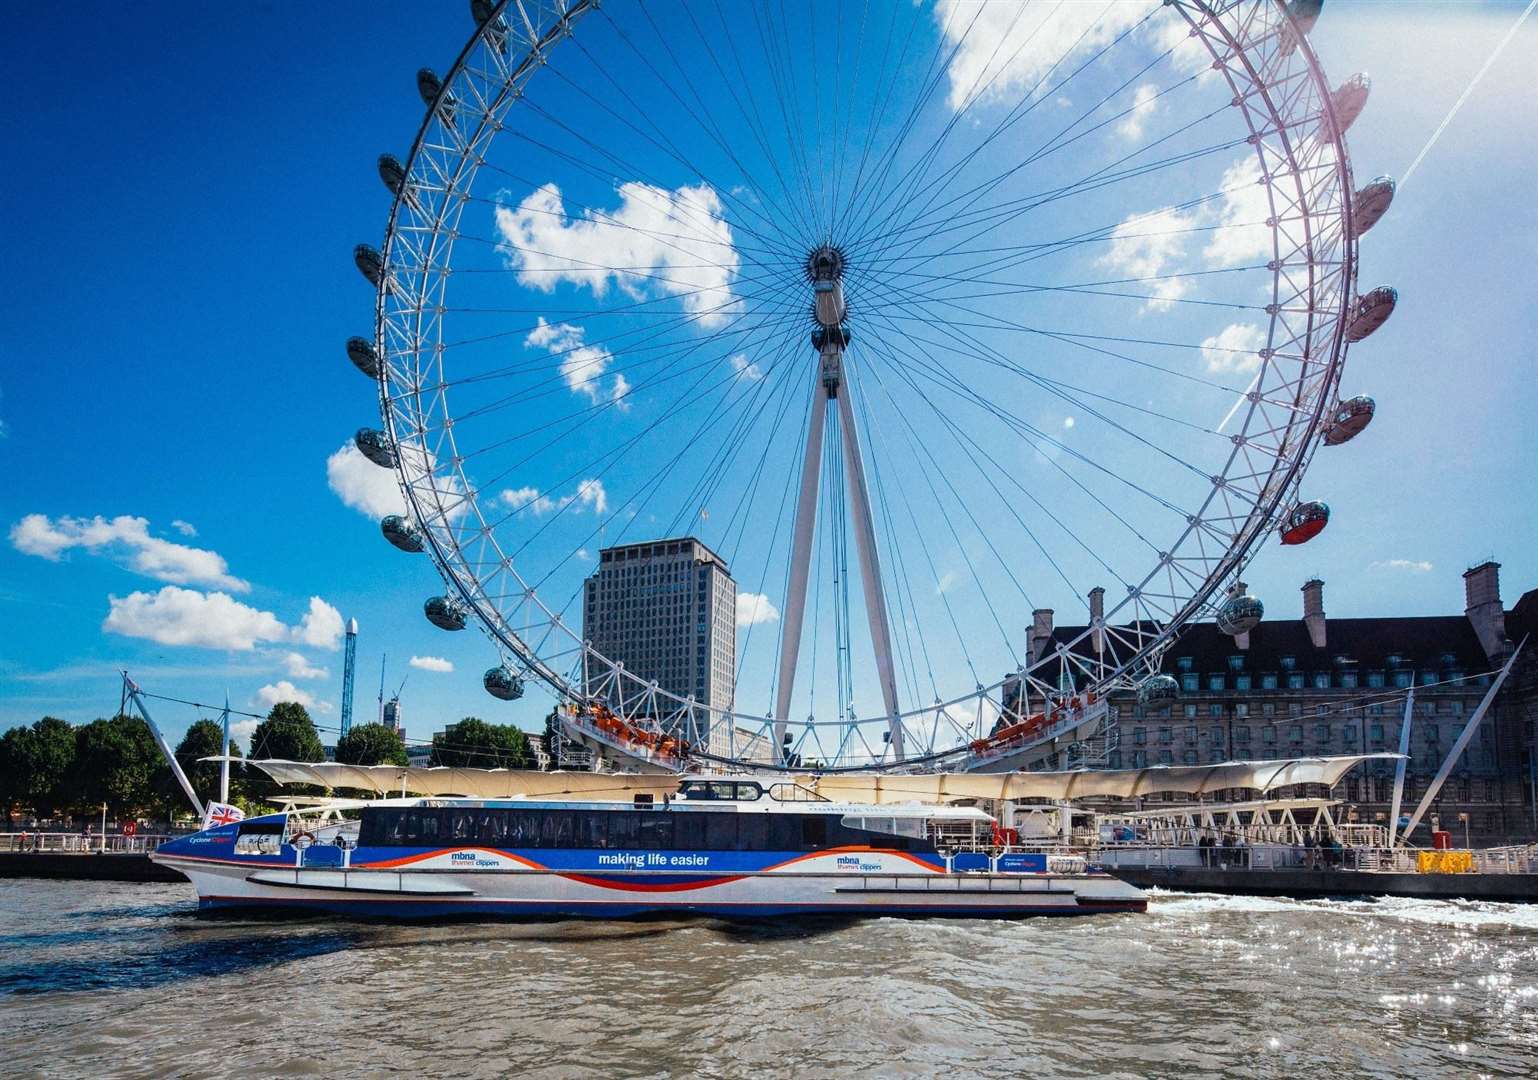 Enjoy a free ride on the Thames if you're called Archie